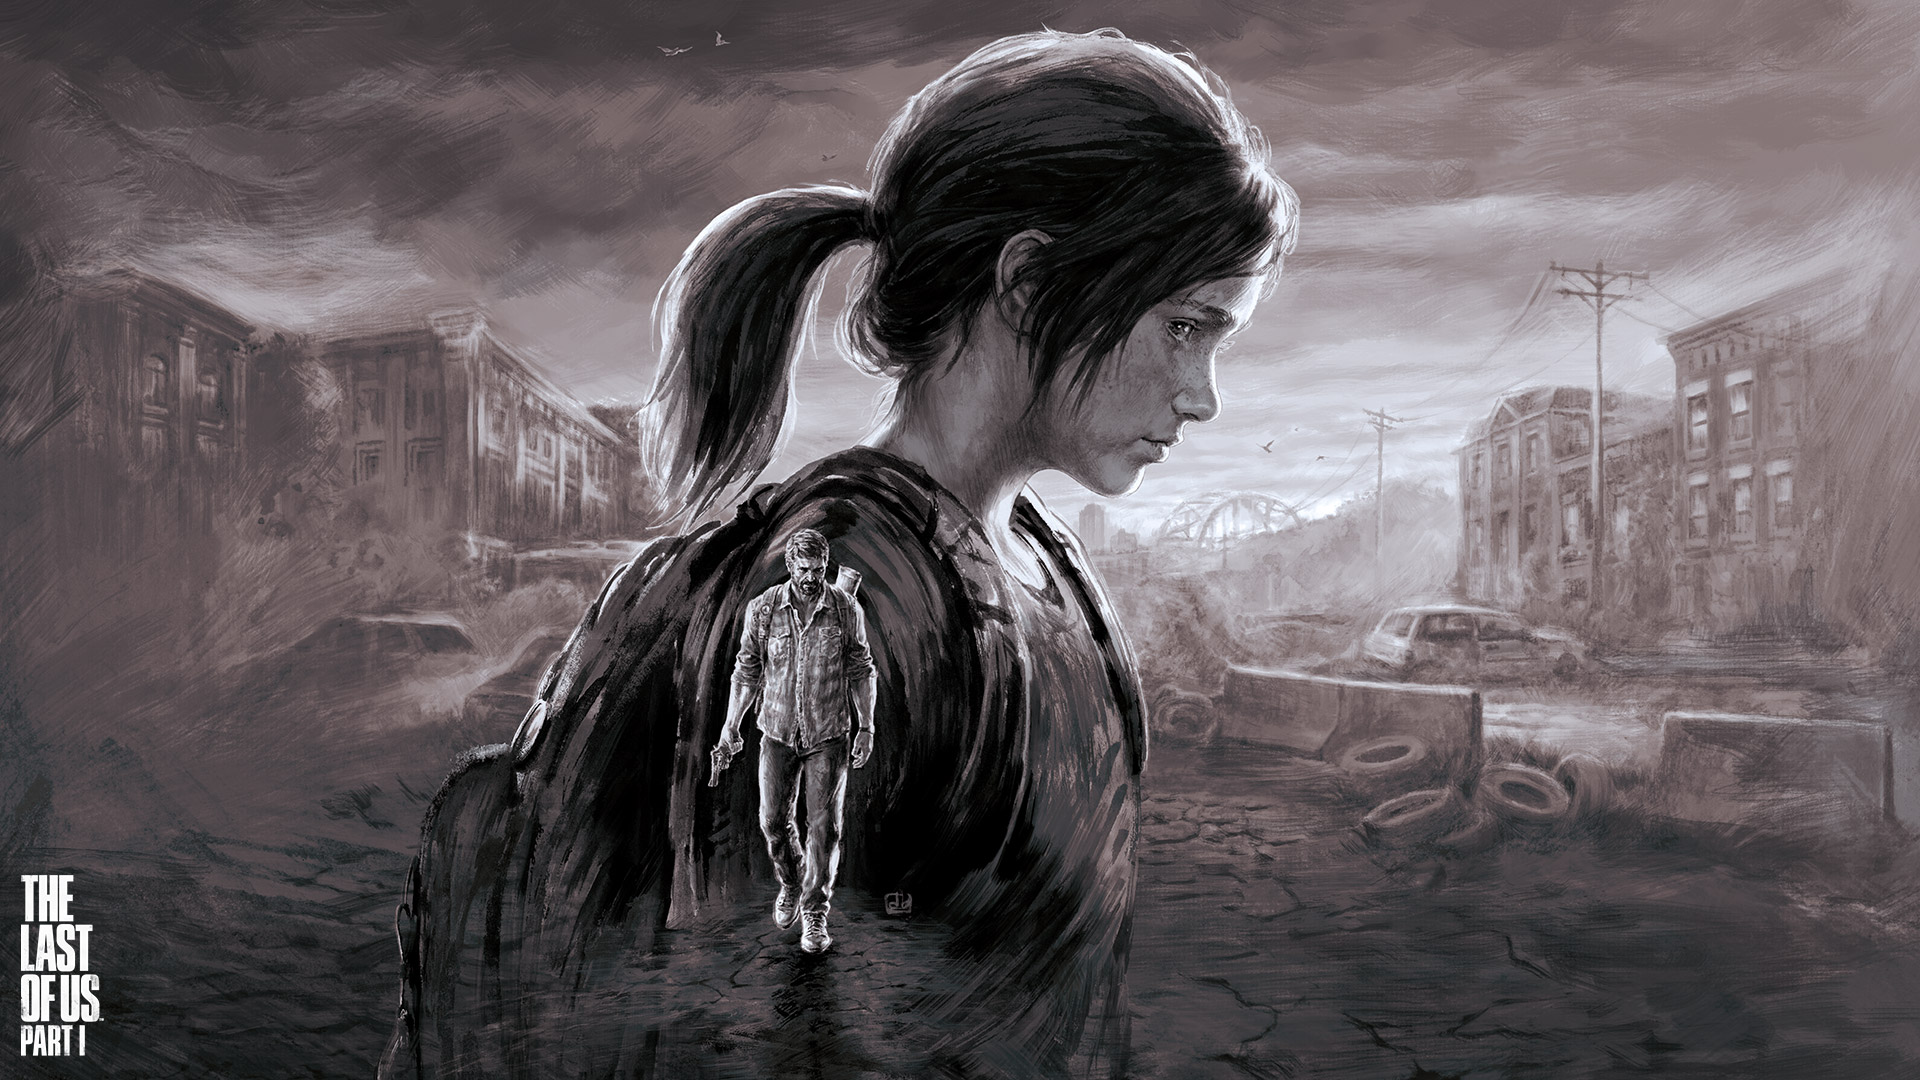 The Last Of Us Part II Wallpapers - Wallpaper Cave